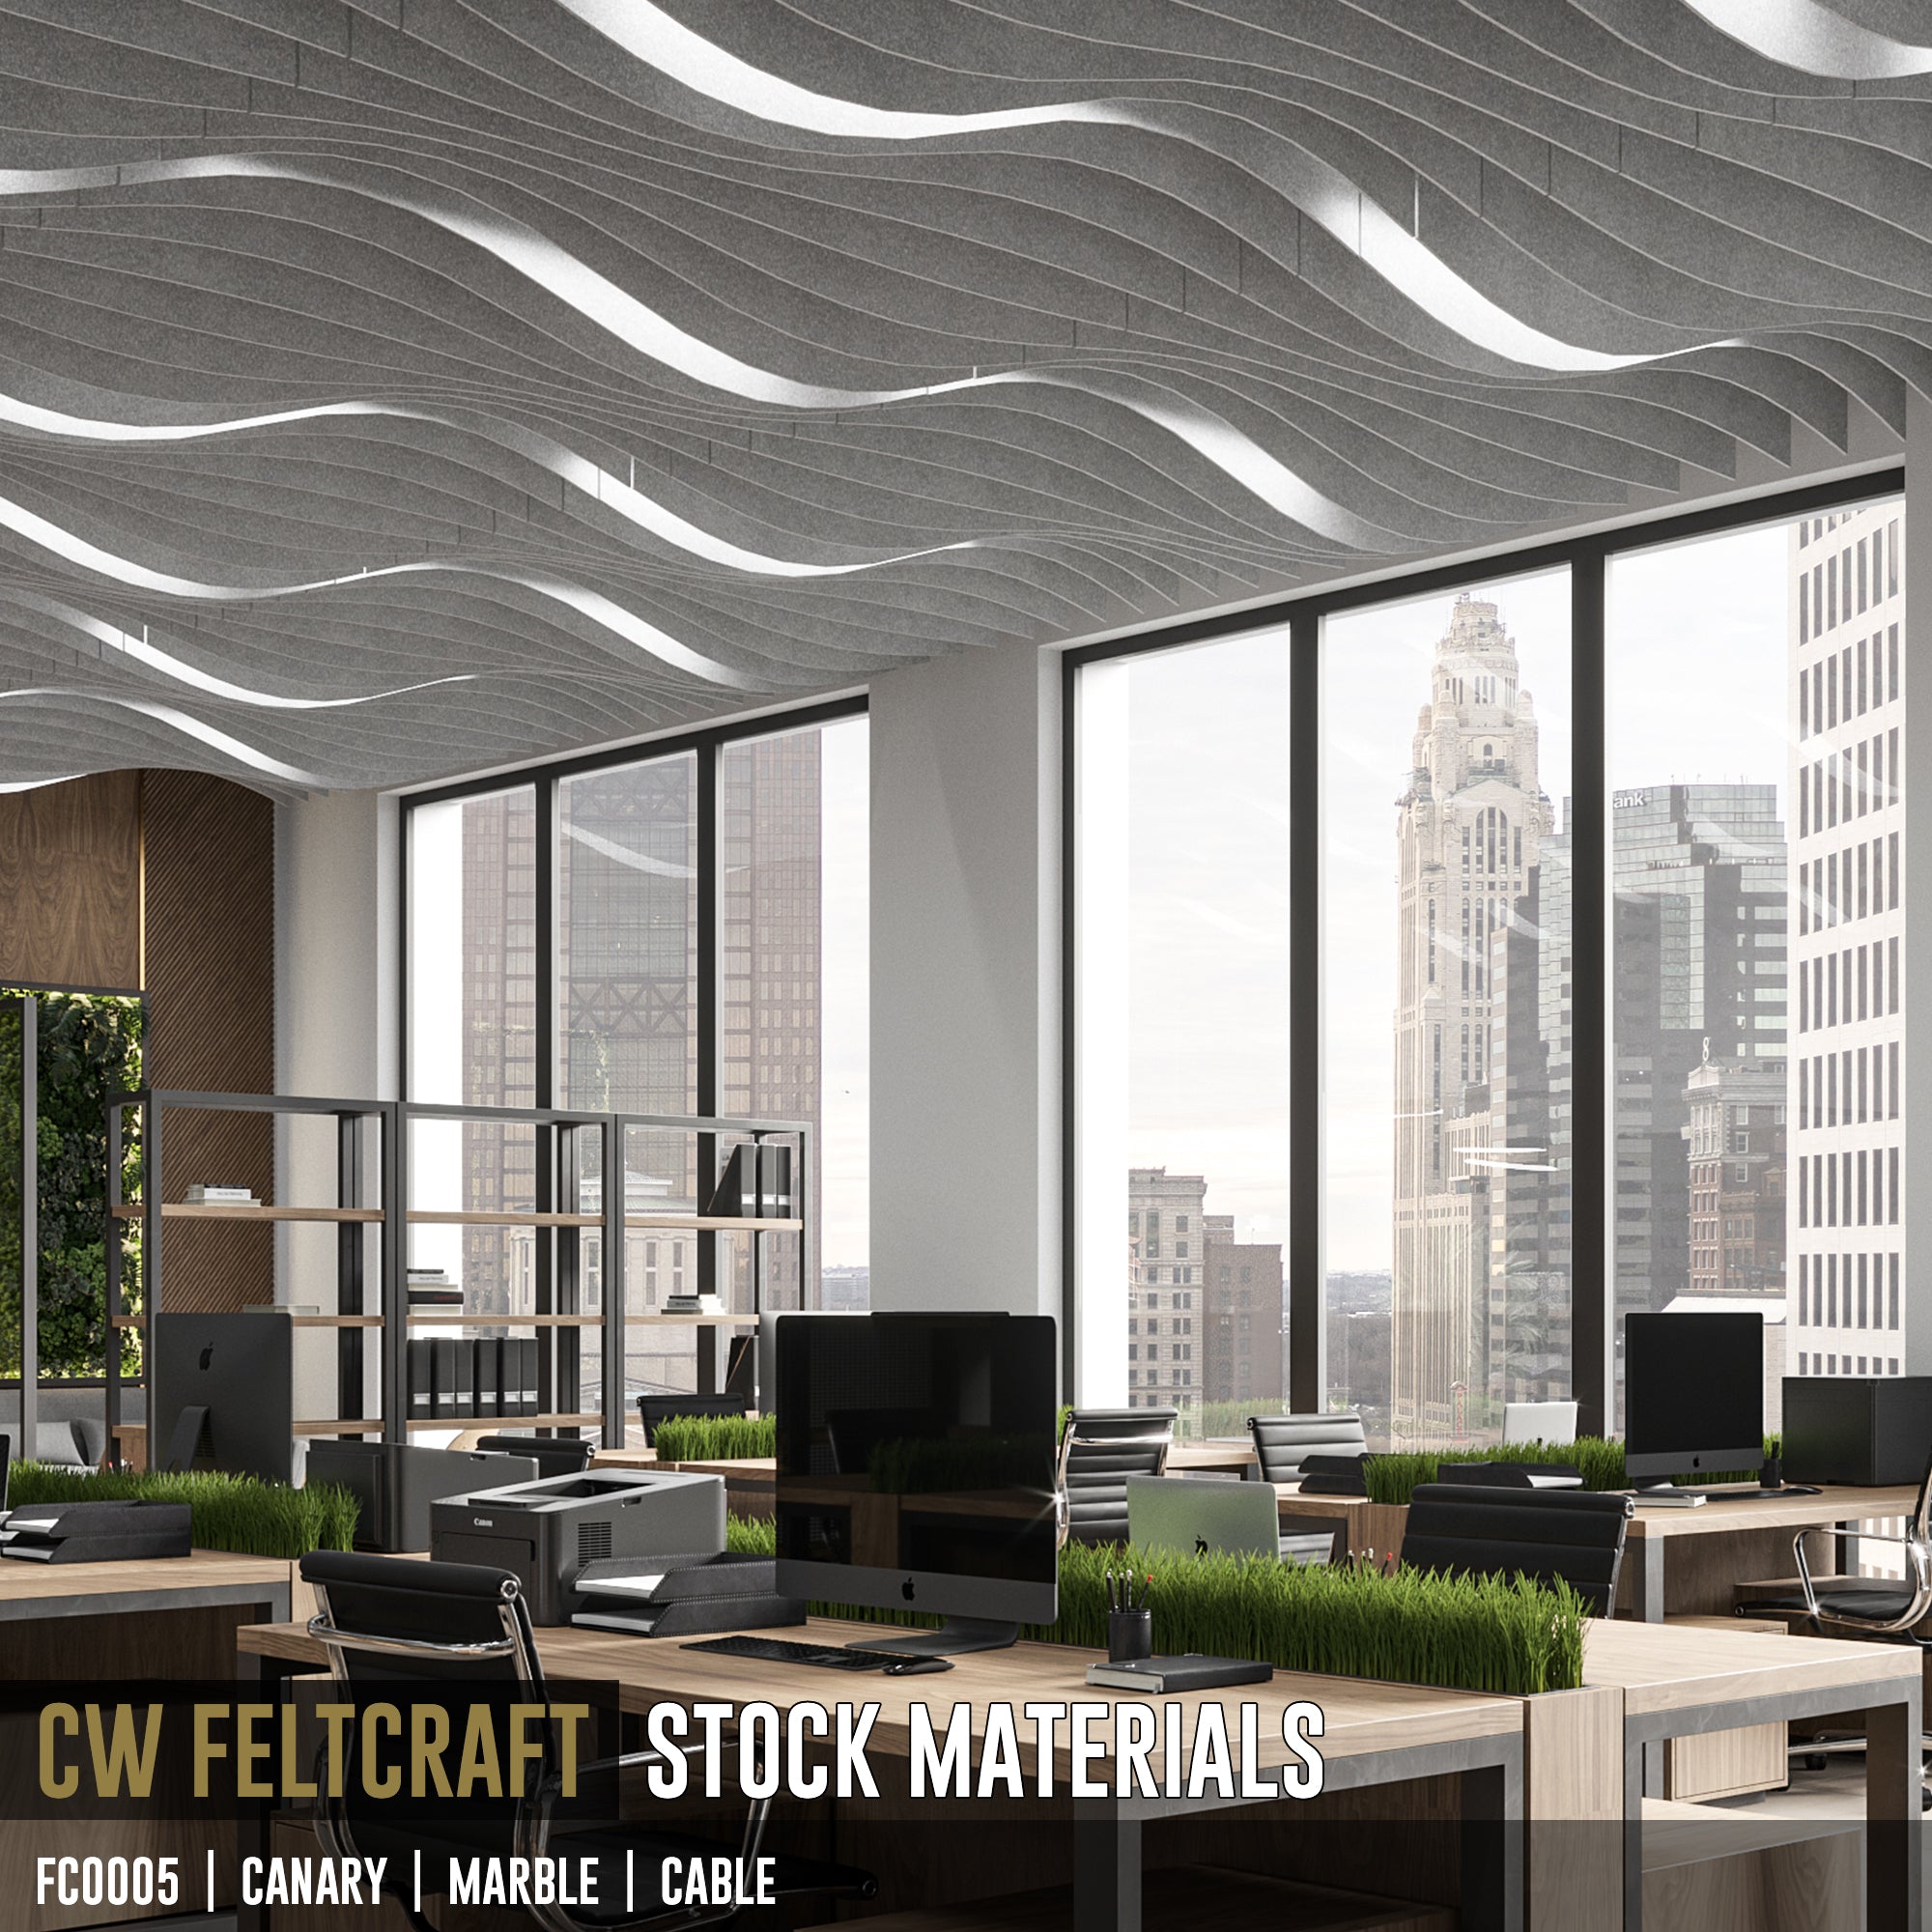 FC0005 | Canary | Suspended Acoustical Ceiling Baffles System